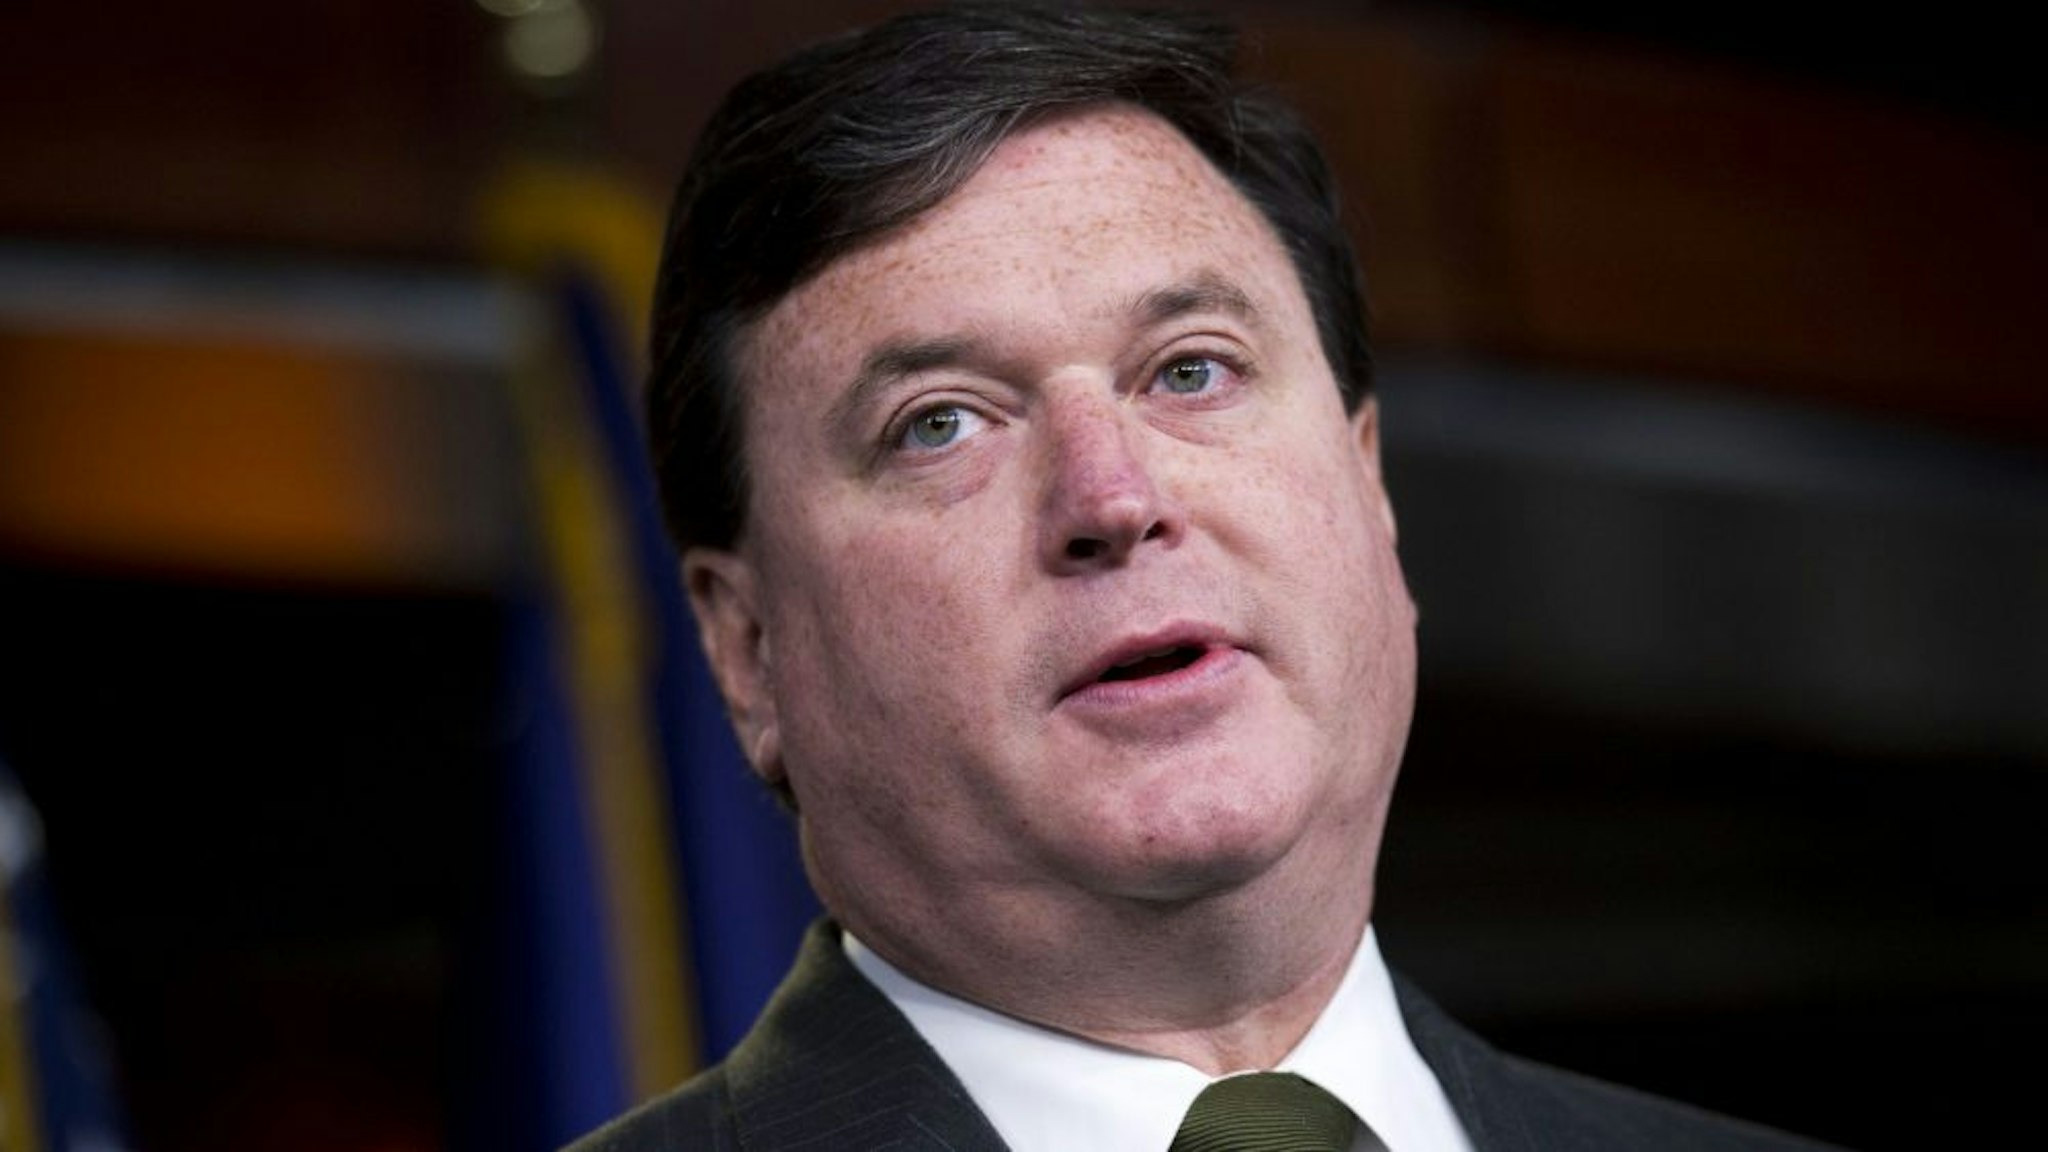 UNITED STATES - MARCH 17: Rep. Todd Rokita, R-Ind., attends a news conference in the Capitol Visitor Center with members of the House Budget Committee to introduce the FY2016 budget resolution and discuss ways to balance the budget, March 17, 2015.